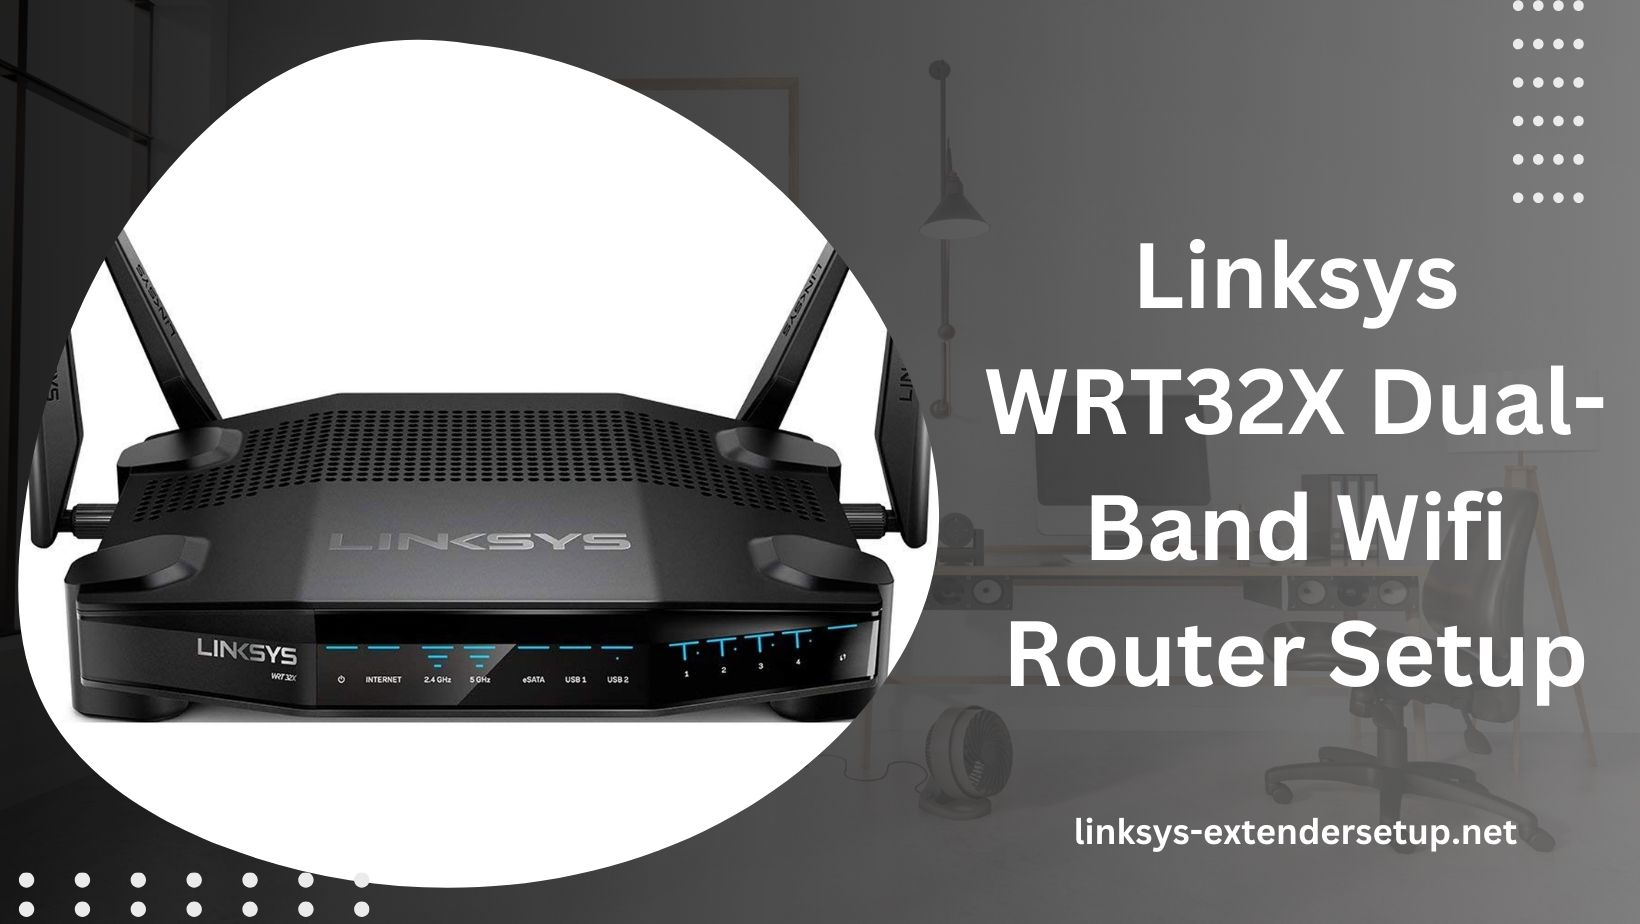 You are currently viewing Complete guide for Linksys WRT32X Dual-Band Wifi Router Setup